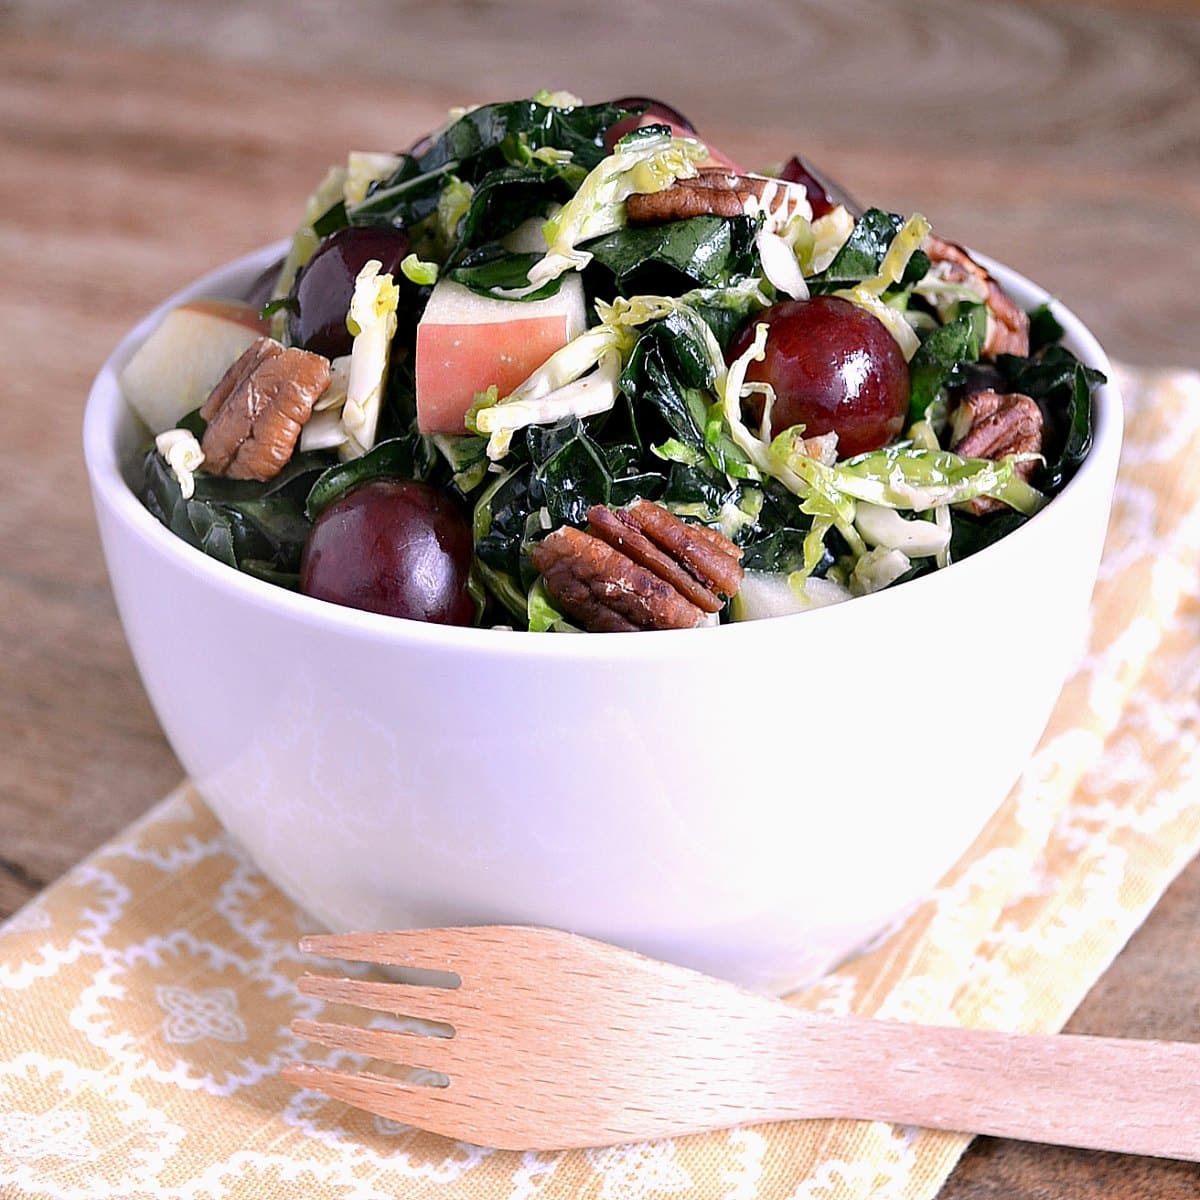 Kale and Brussels Sprout Salad (with Maple Vinaigrette)